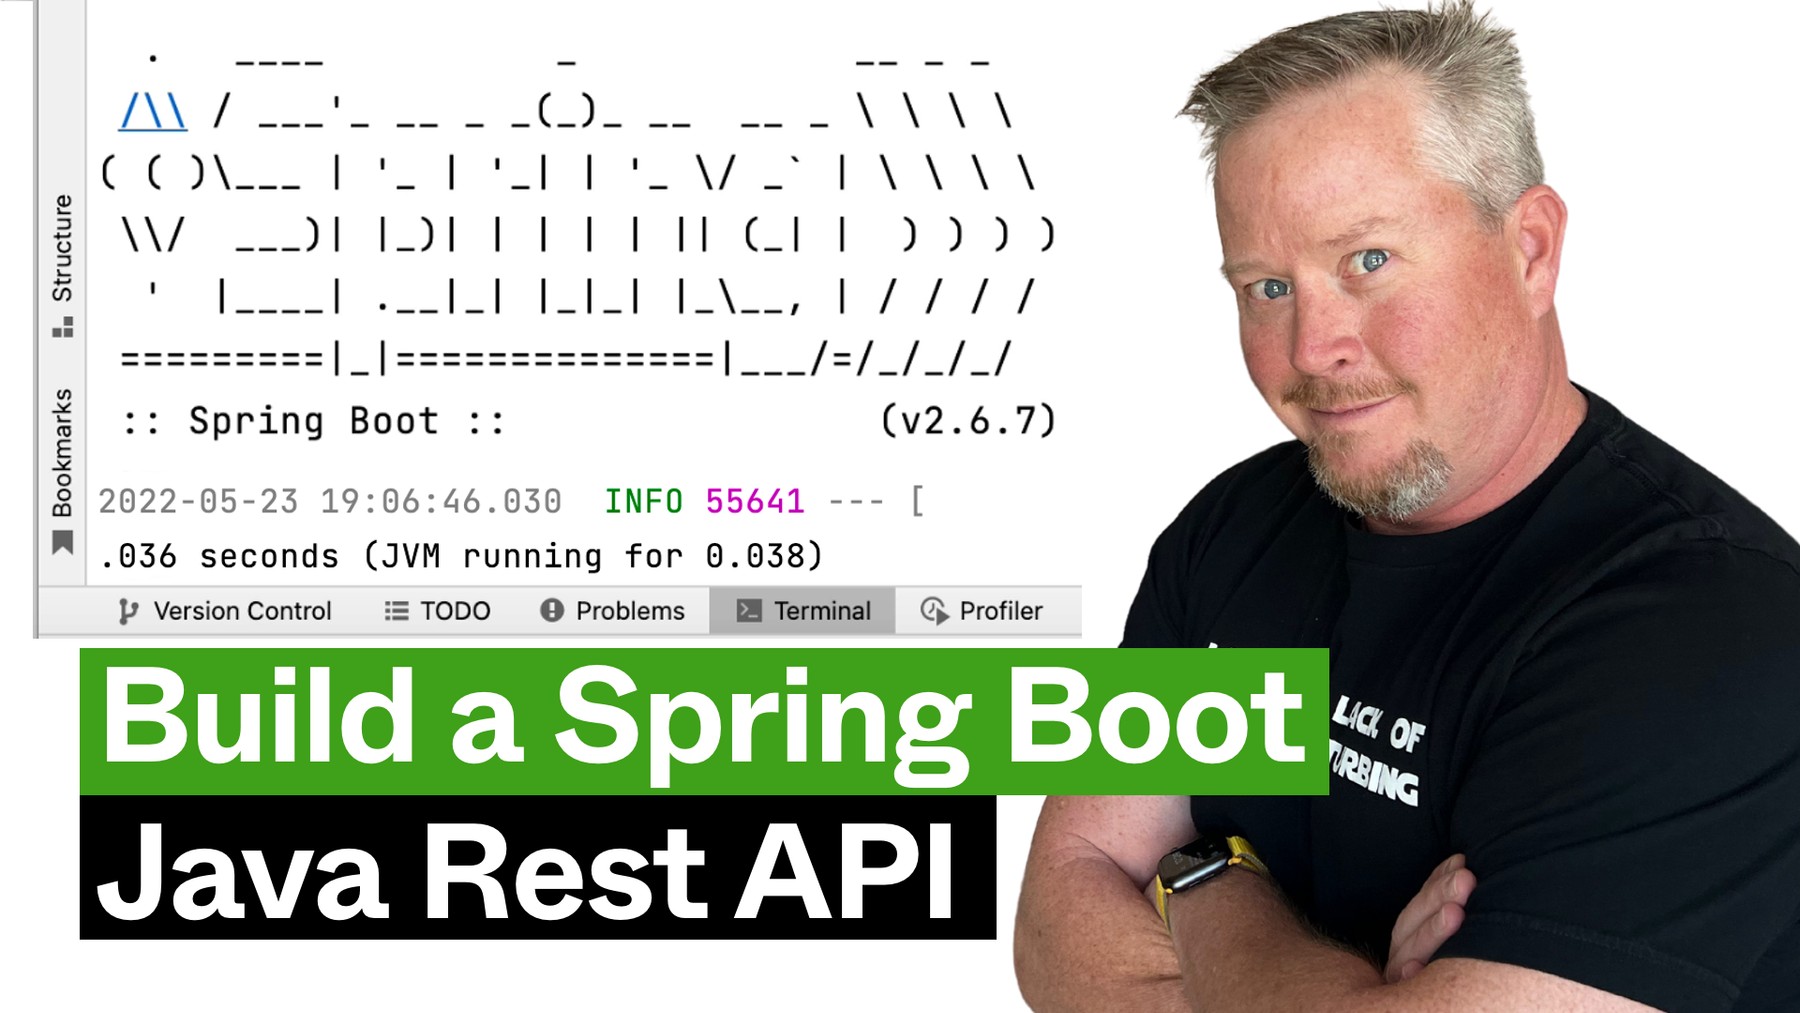 Start a Java REST API with Spring Boot